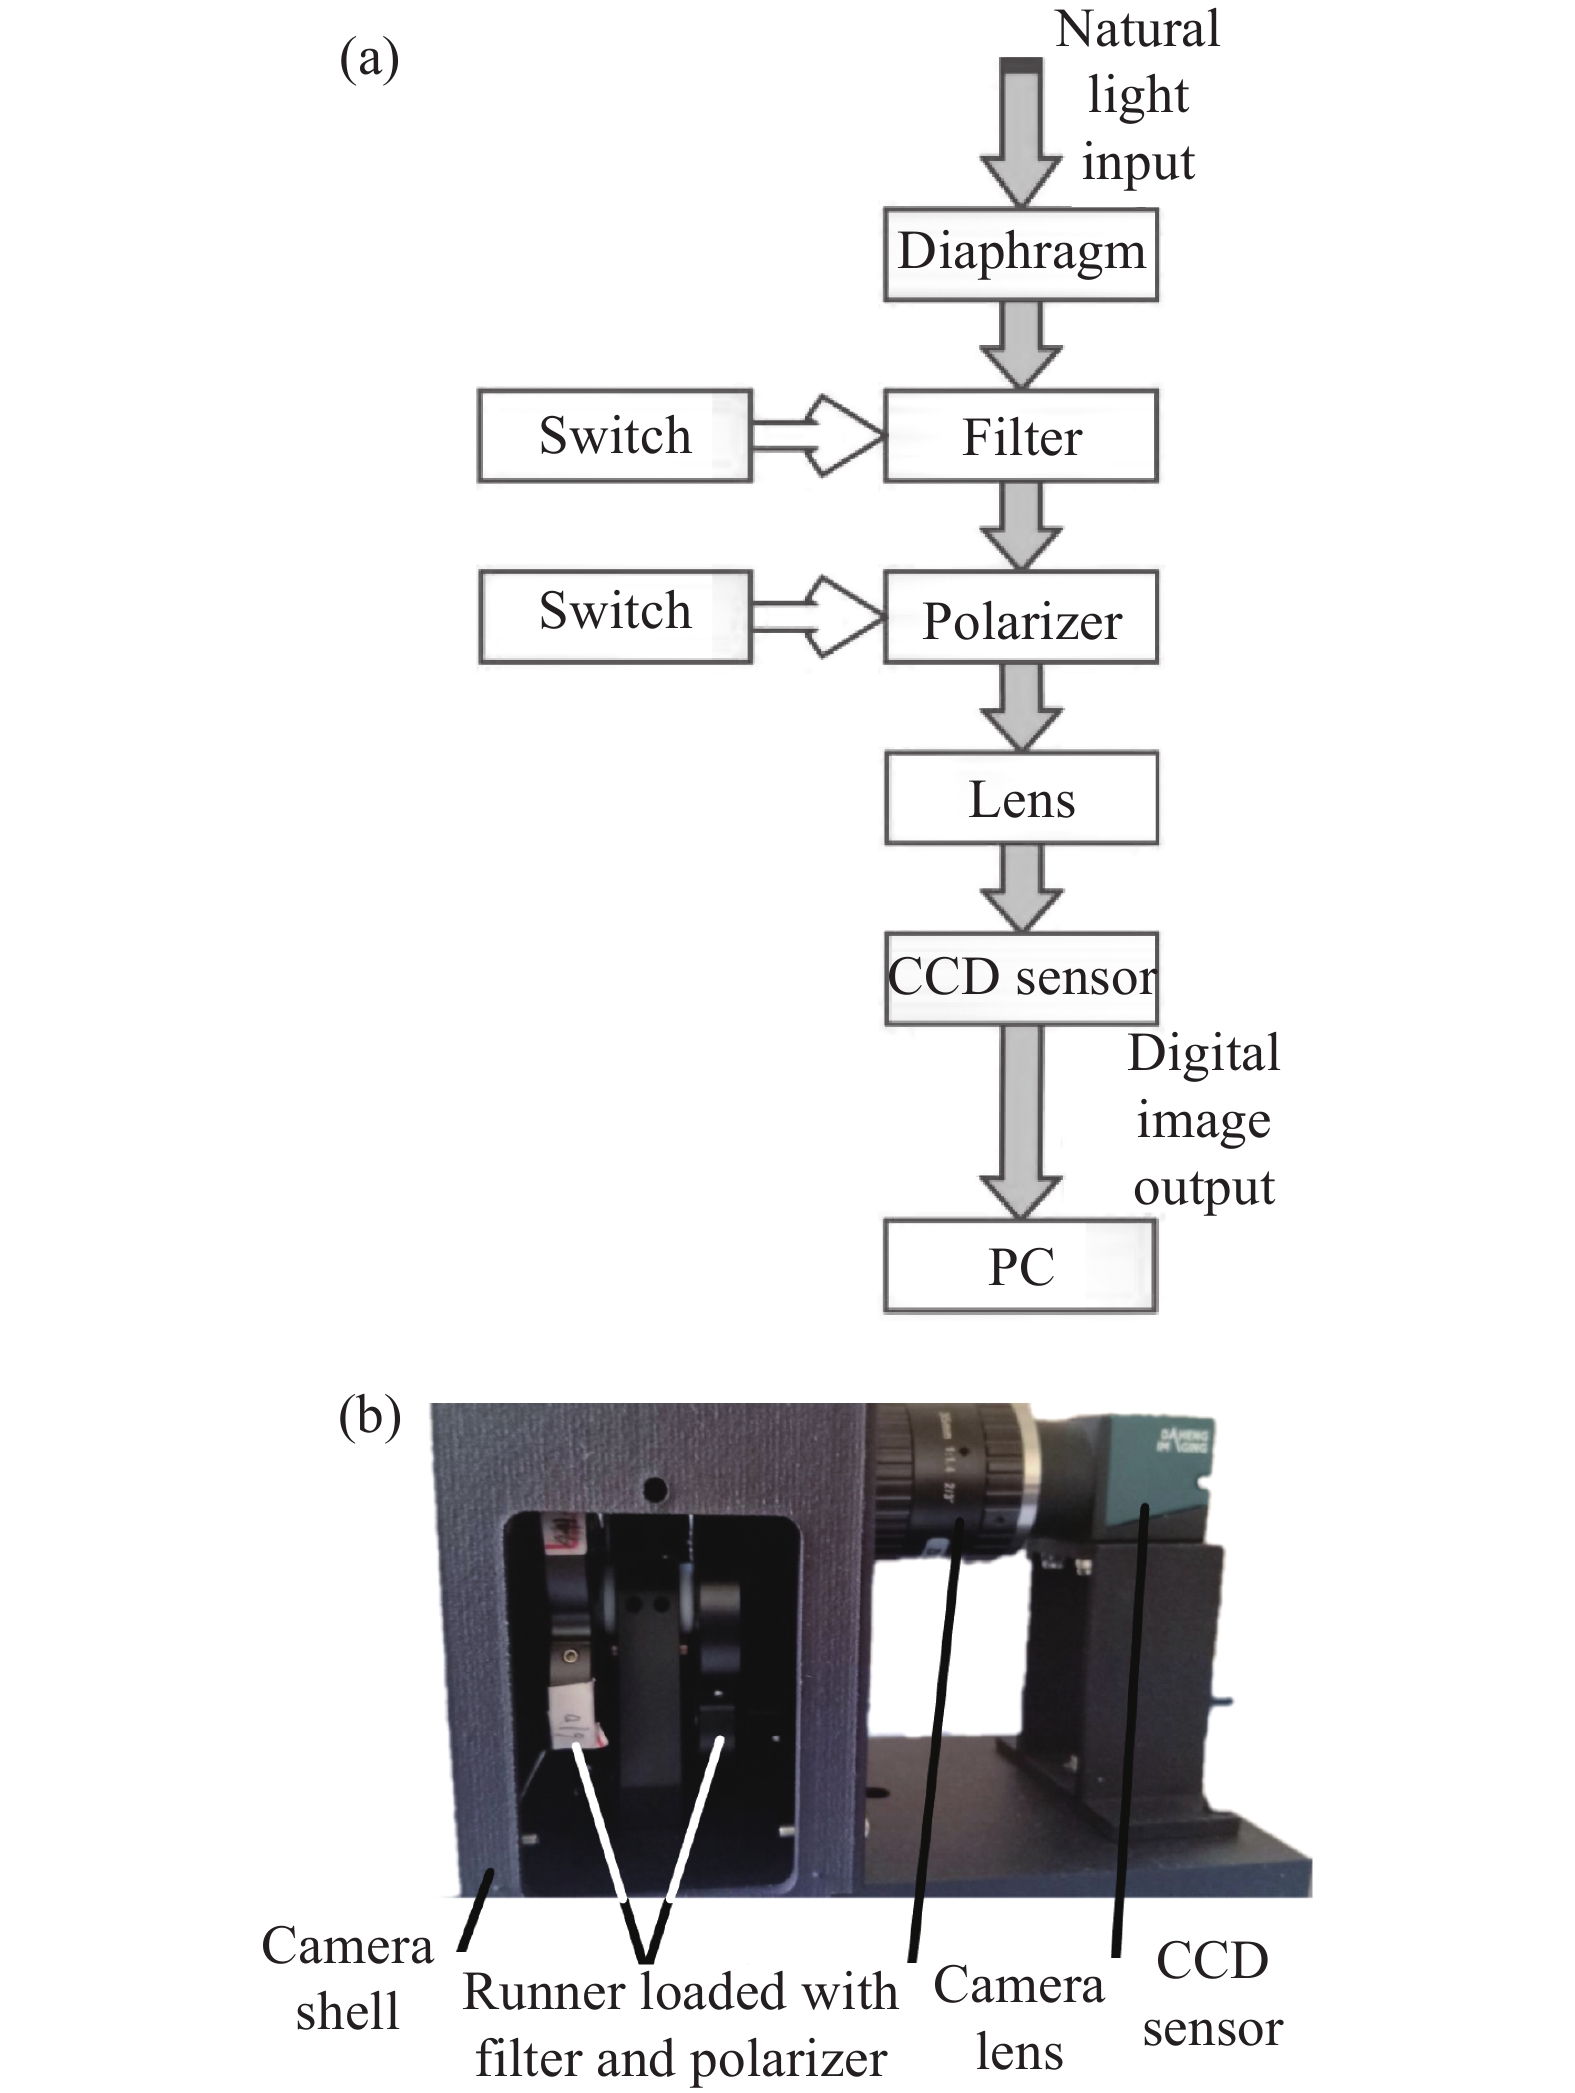 (a) Structure diagram of polarized multispectral imaging system; (b) Physical system image